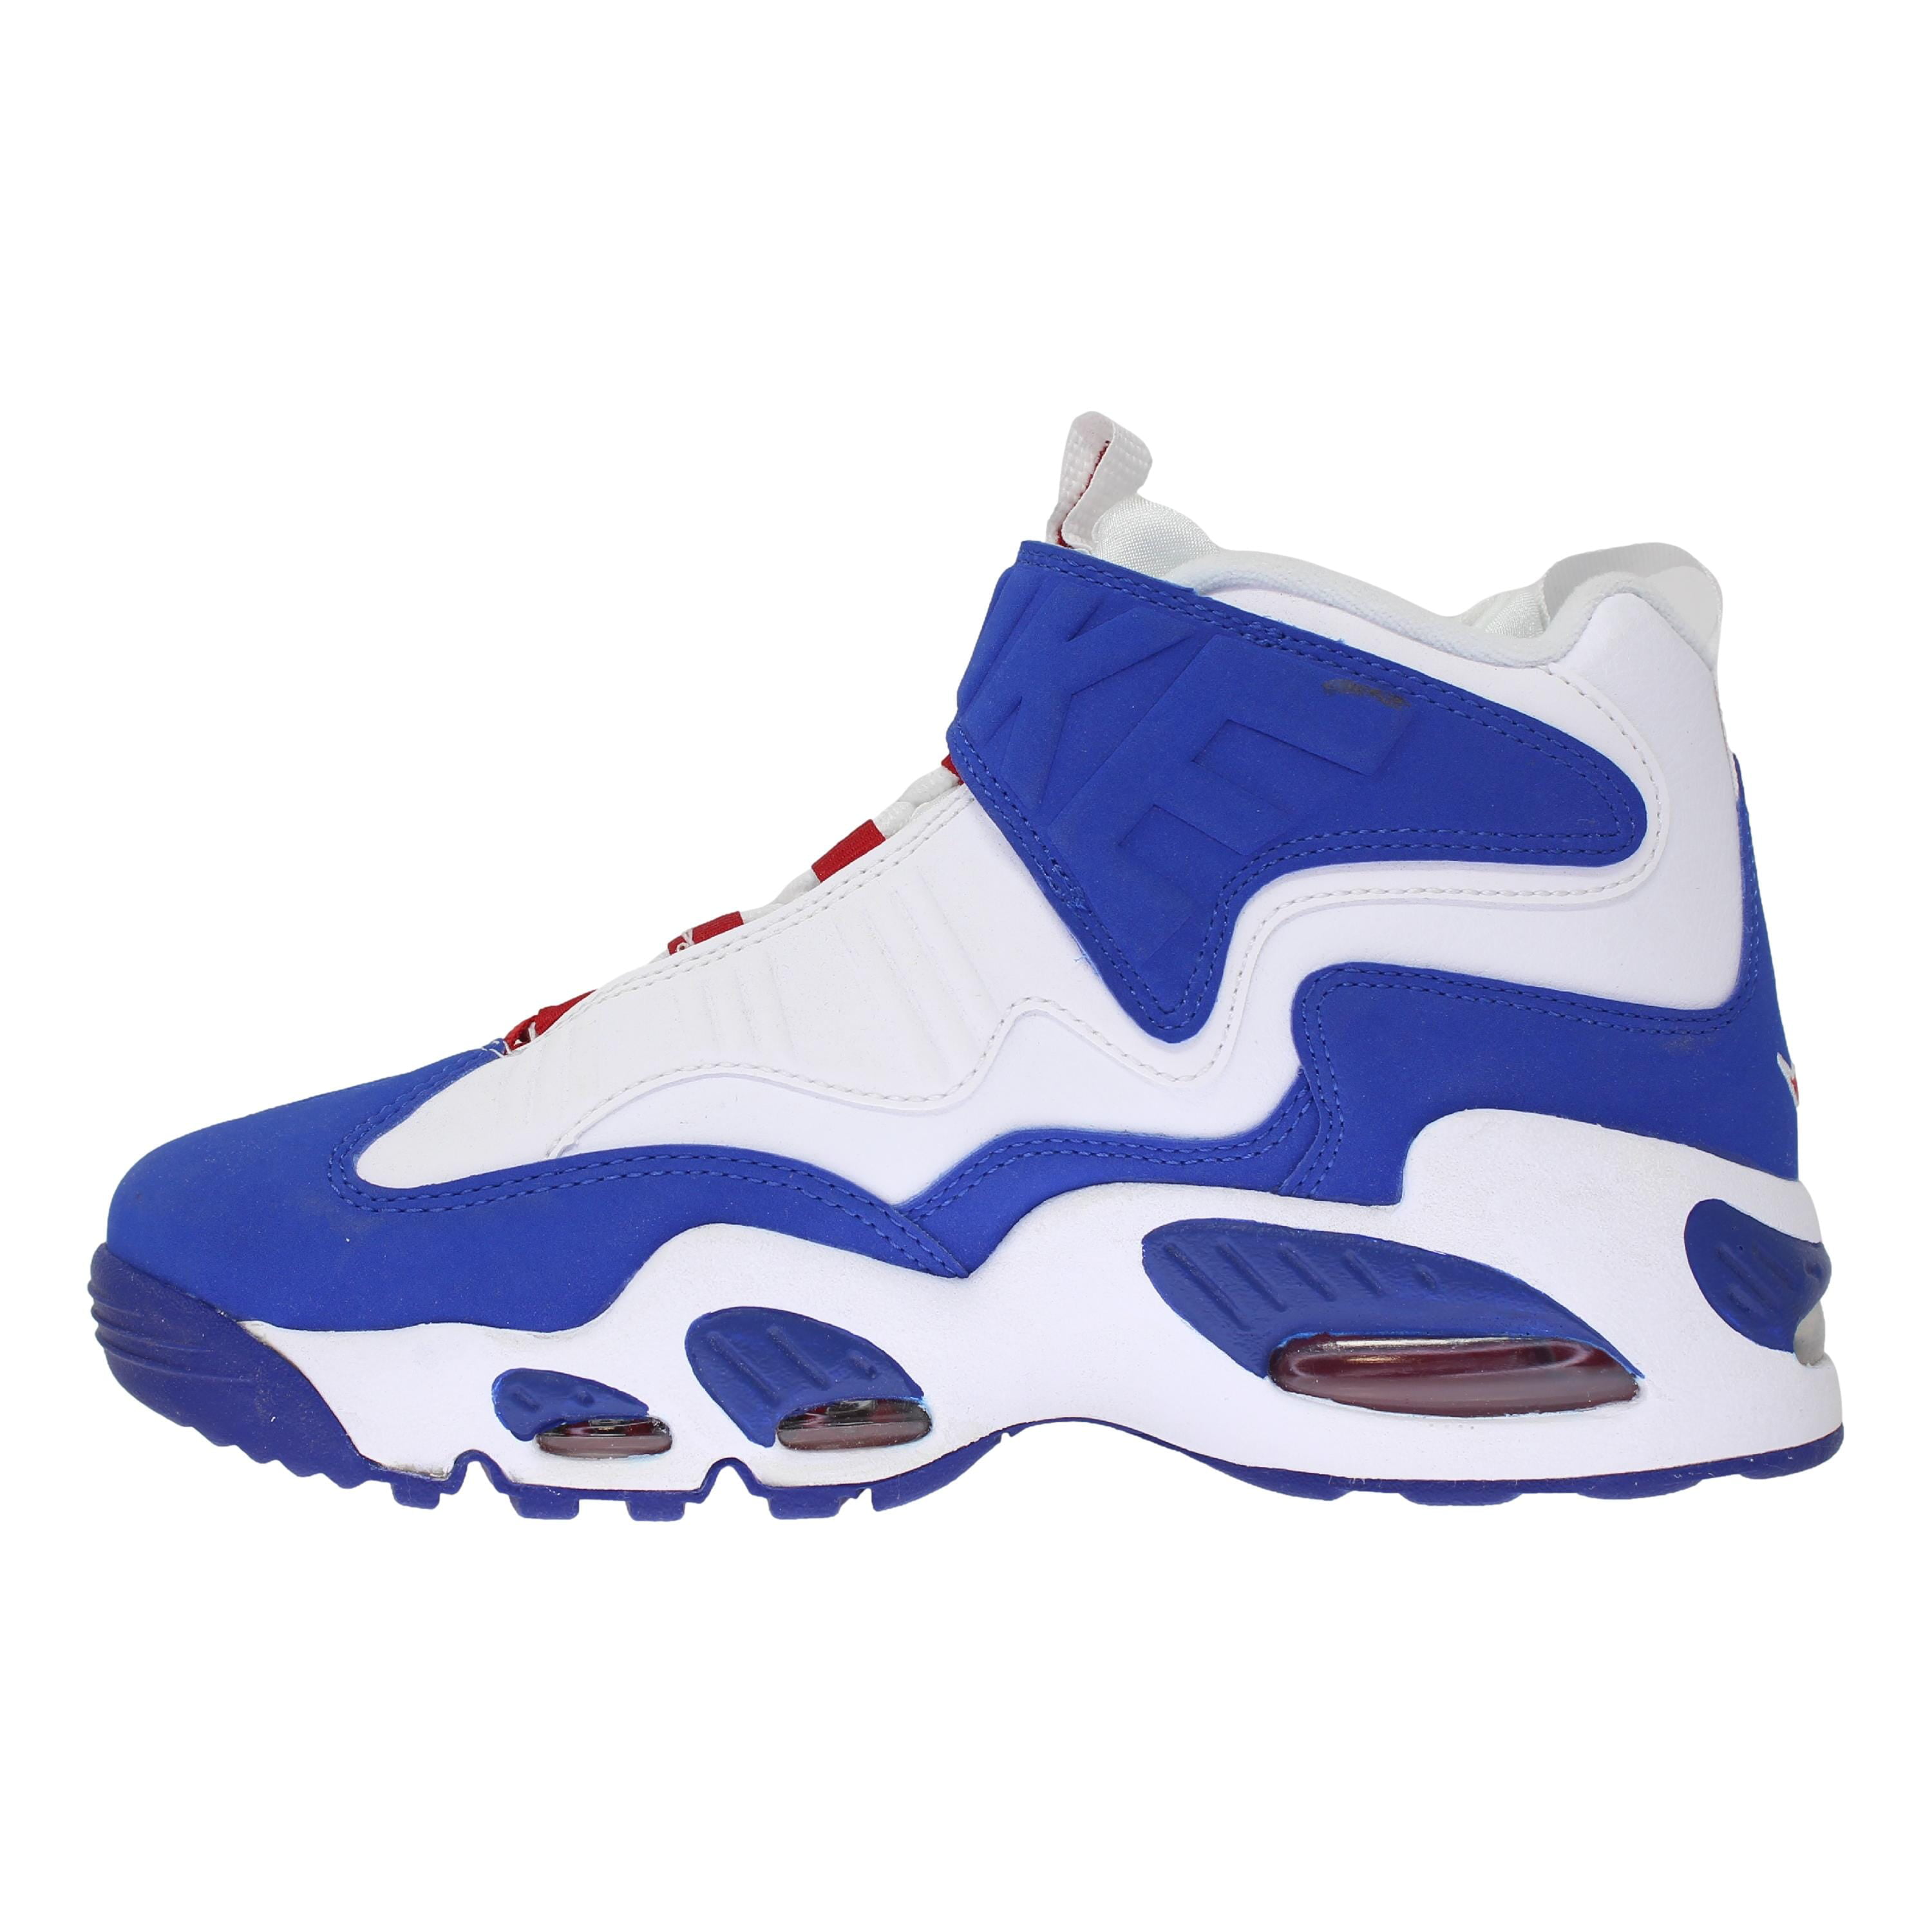 Nike Air Griffey Max 1 White/Old Royal-Gym Red DX3723-100 Men's